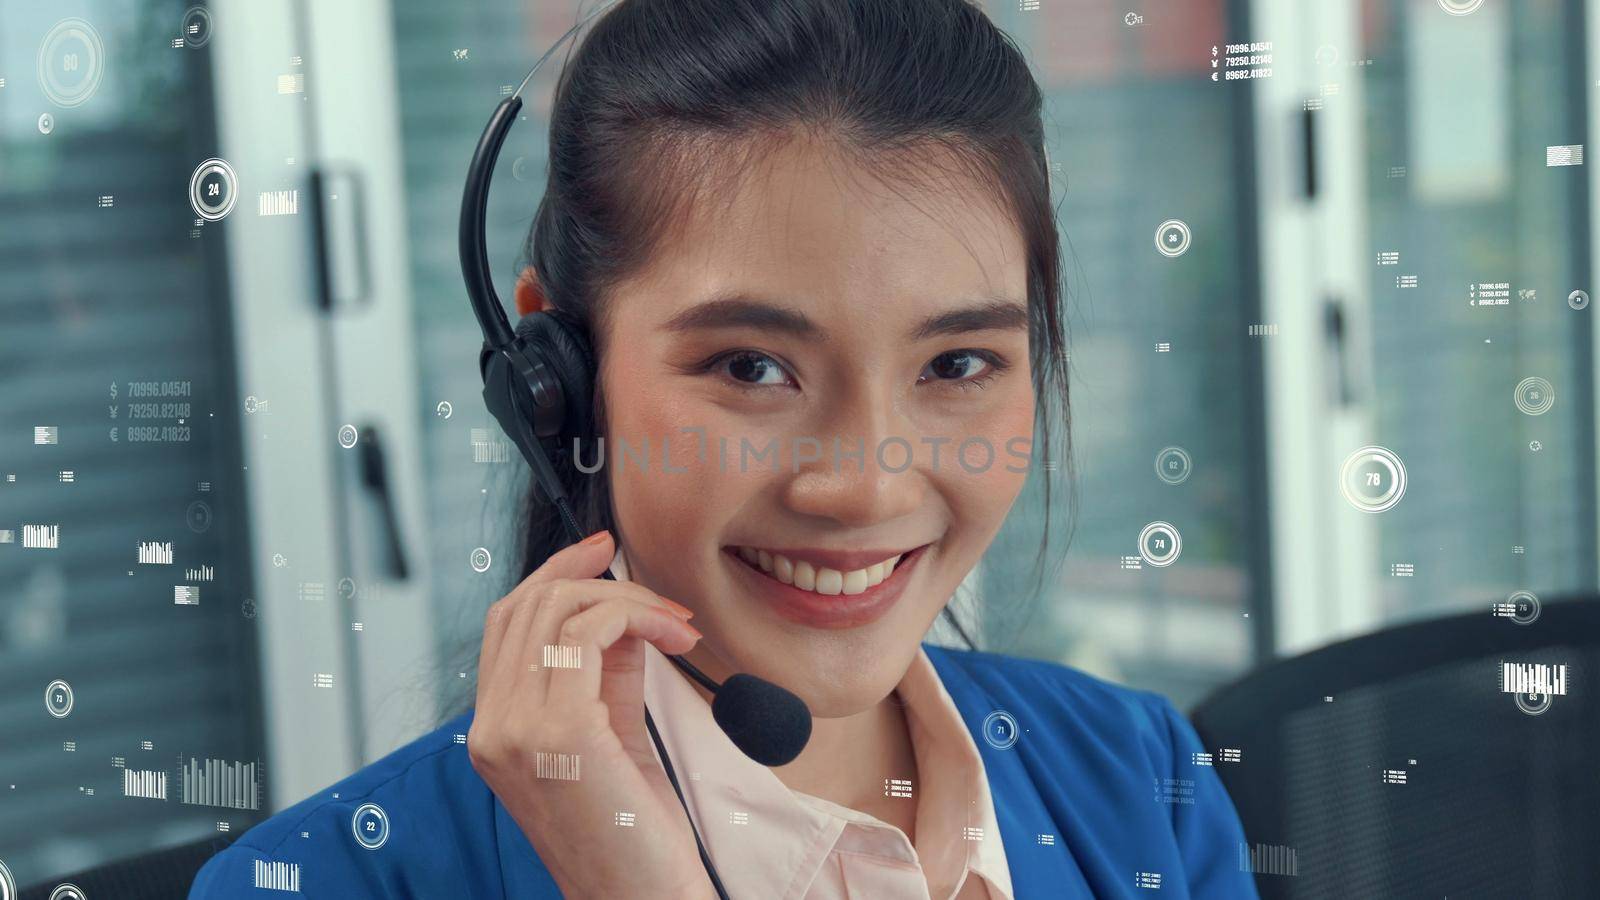 Customer support call center provide data with envisional graphic . Business and communication technology concept .